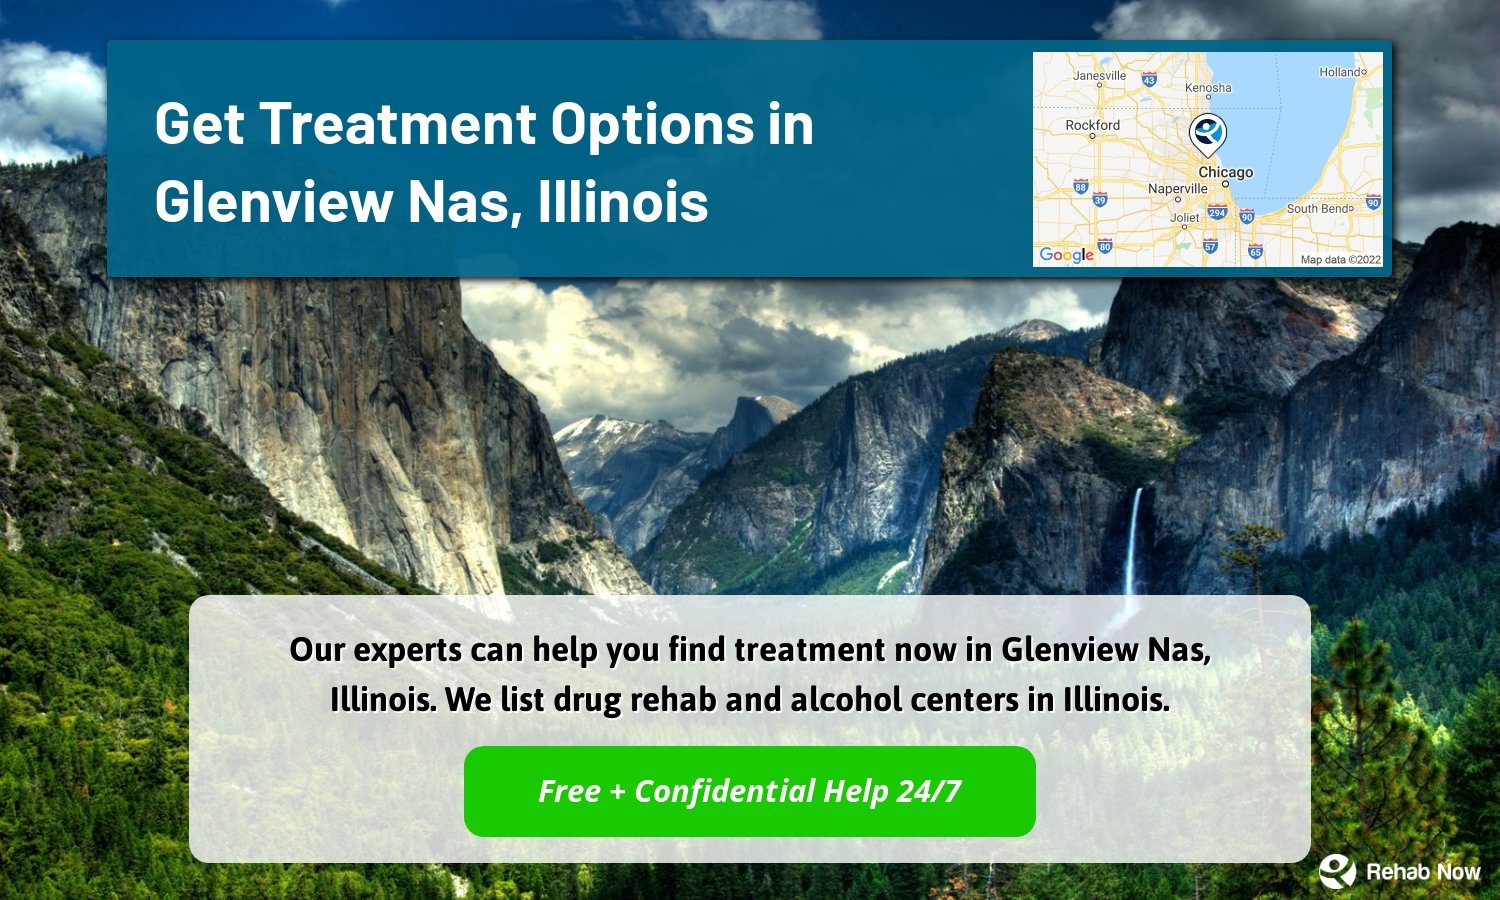 Our experts can help you find treatment now in Glenview Nas, Illinois. We list drug rehab and alcohol centers in Illinois.